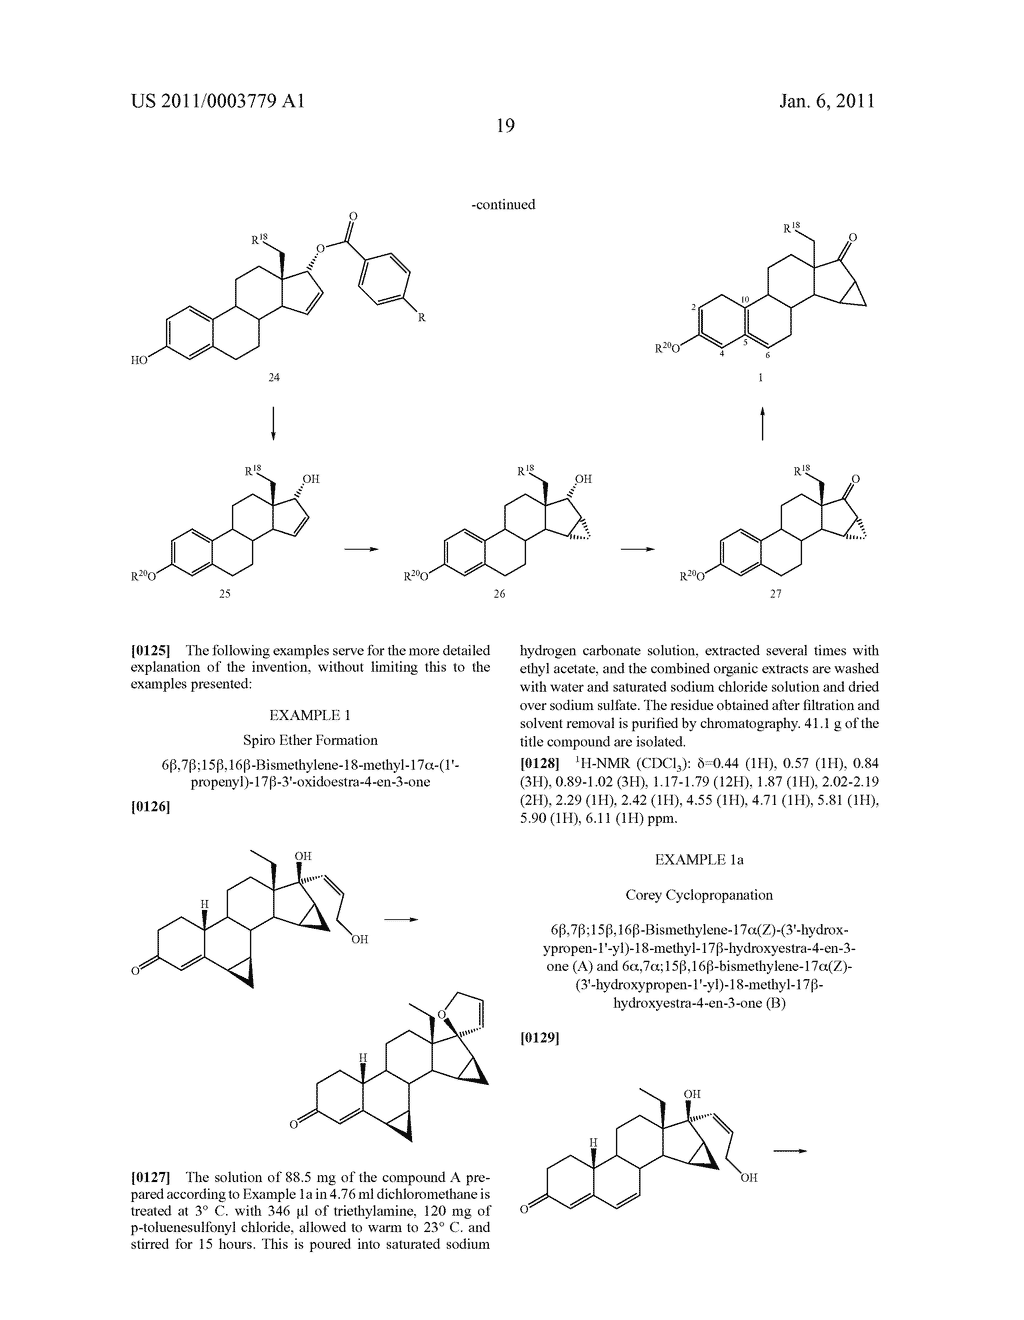 15, 16-METHYLENE-17-(1'-PROPENYL)-17,3'-OXIDOESTRA-4-EN-3-ONE DERIVATIVE , USE THEREOF, AND MEDICAMENT CONTAINING SAID DERIVATIVE - diagram, schematic, and image 20